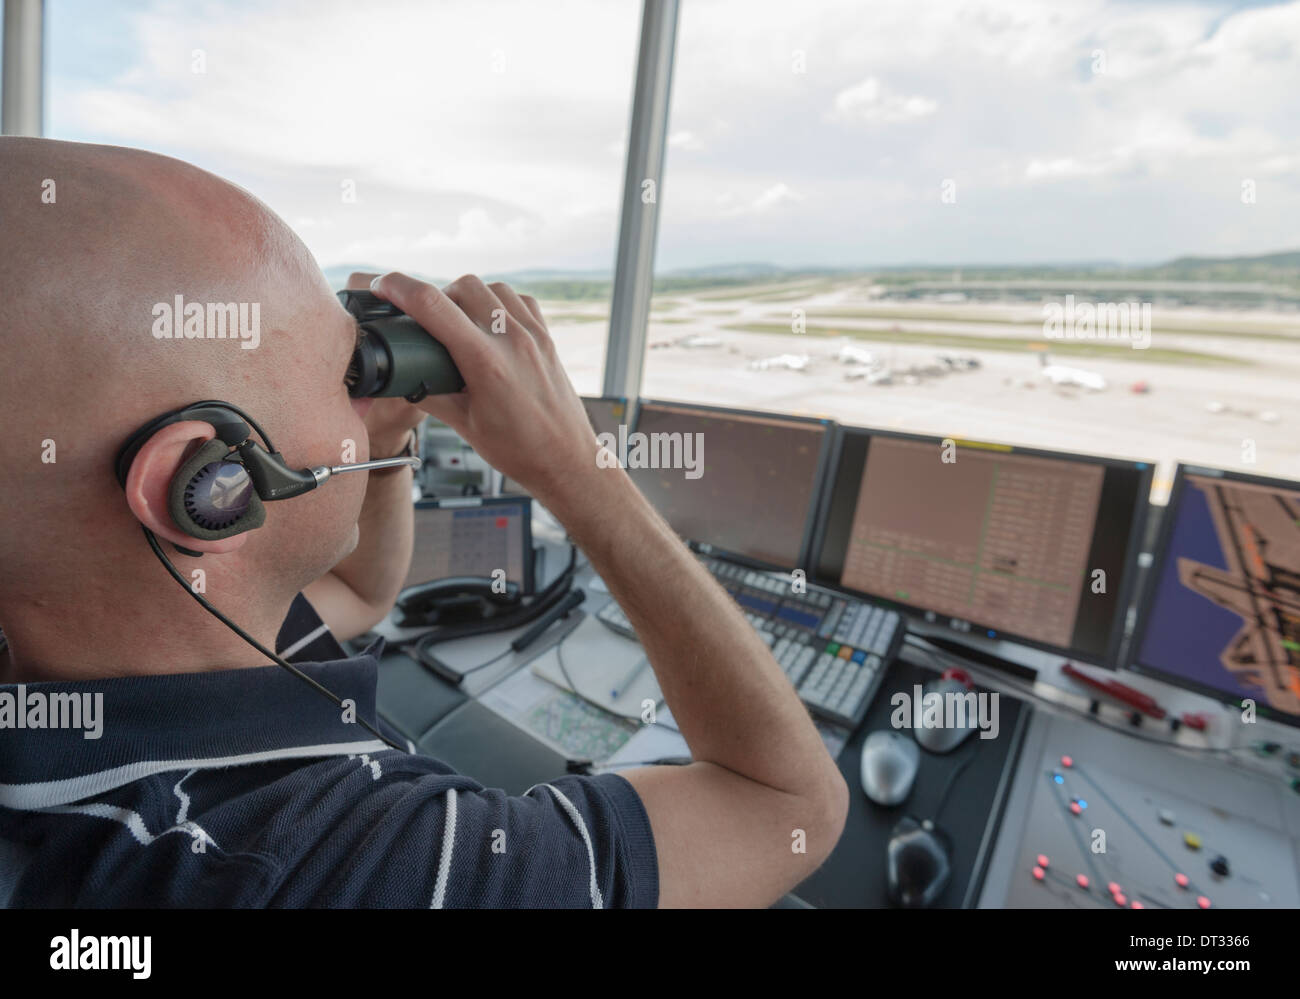 An air traffic controller in the control tower of Zurich/Kloten international airport is monitoring the airport's airfield. Stock Photo